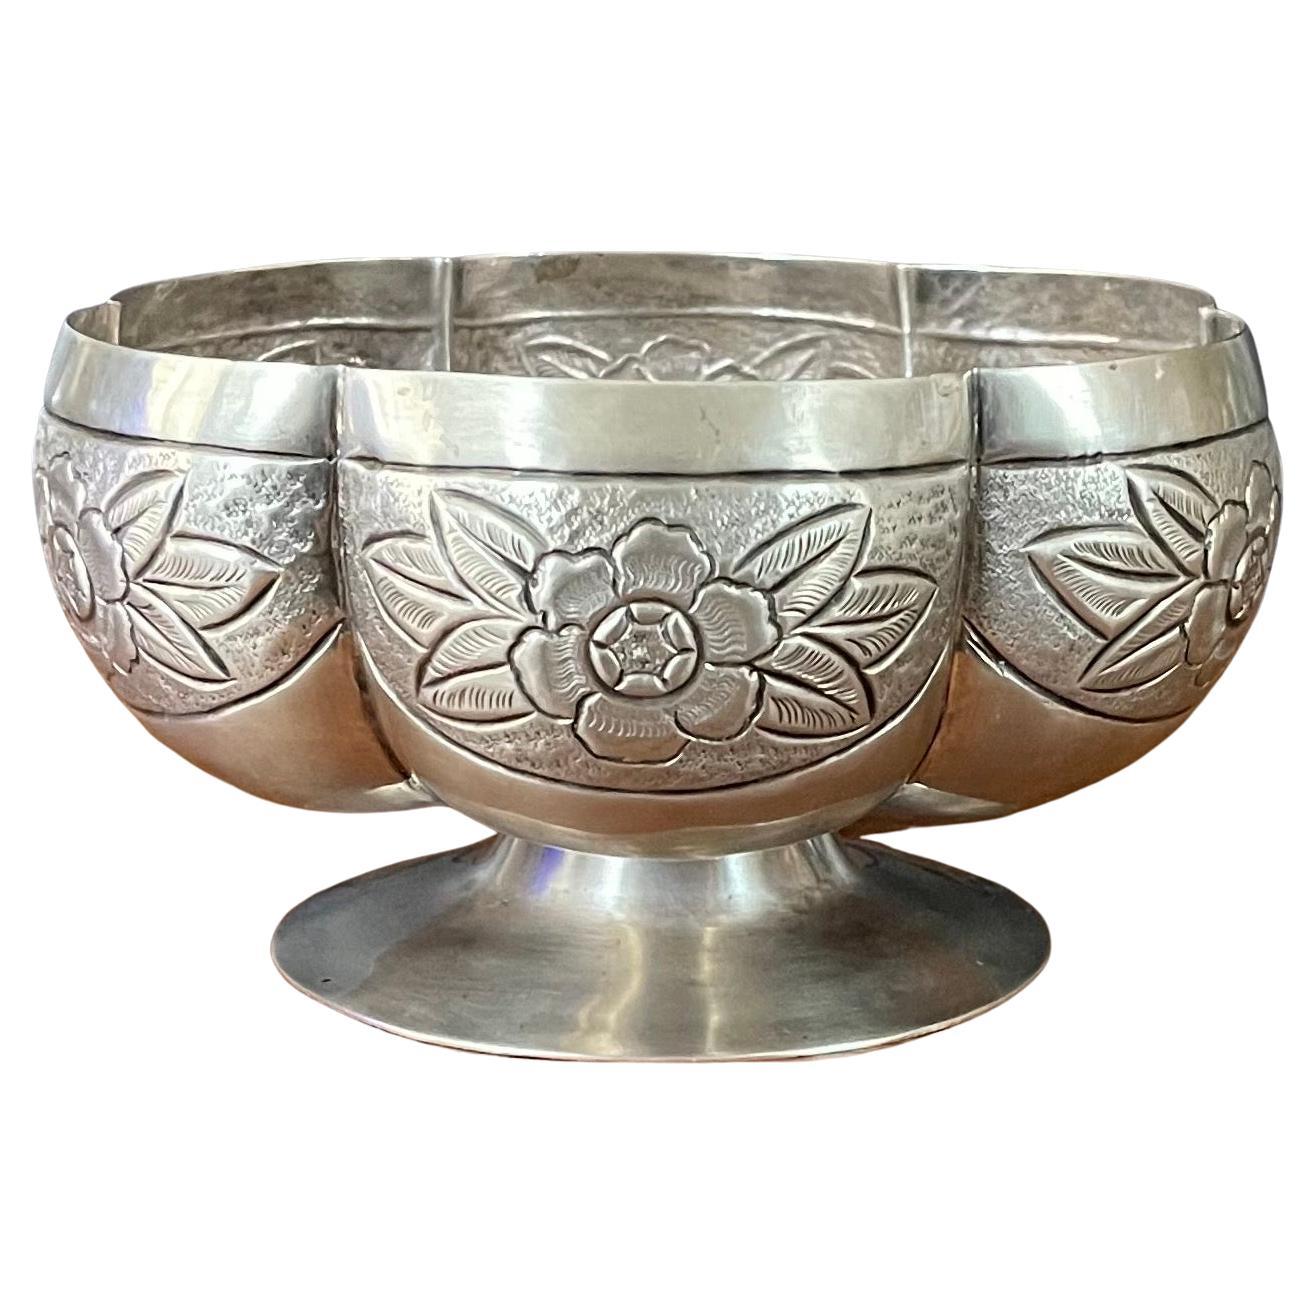 Mexican Sterling Silver Pedestal Bowl with Floral Motif by Maciel